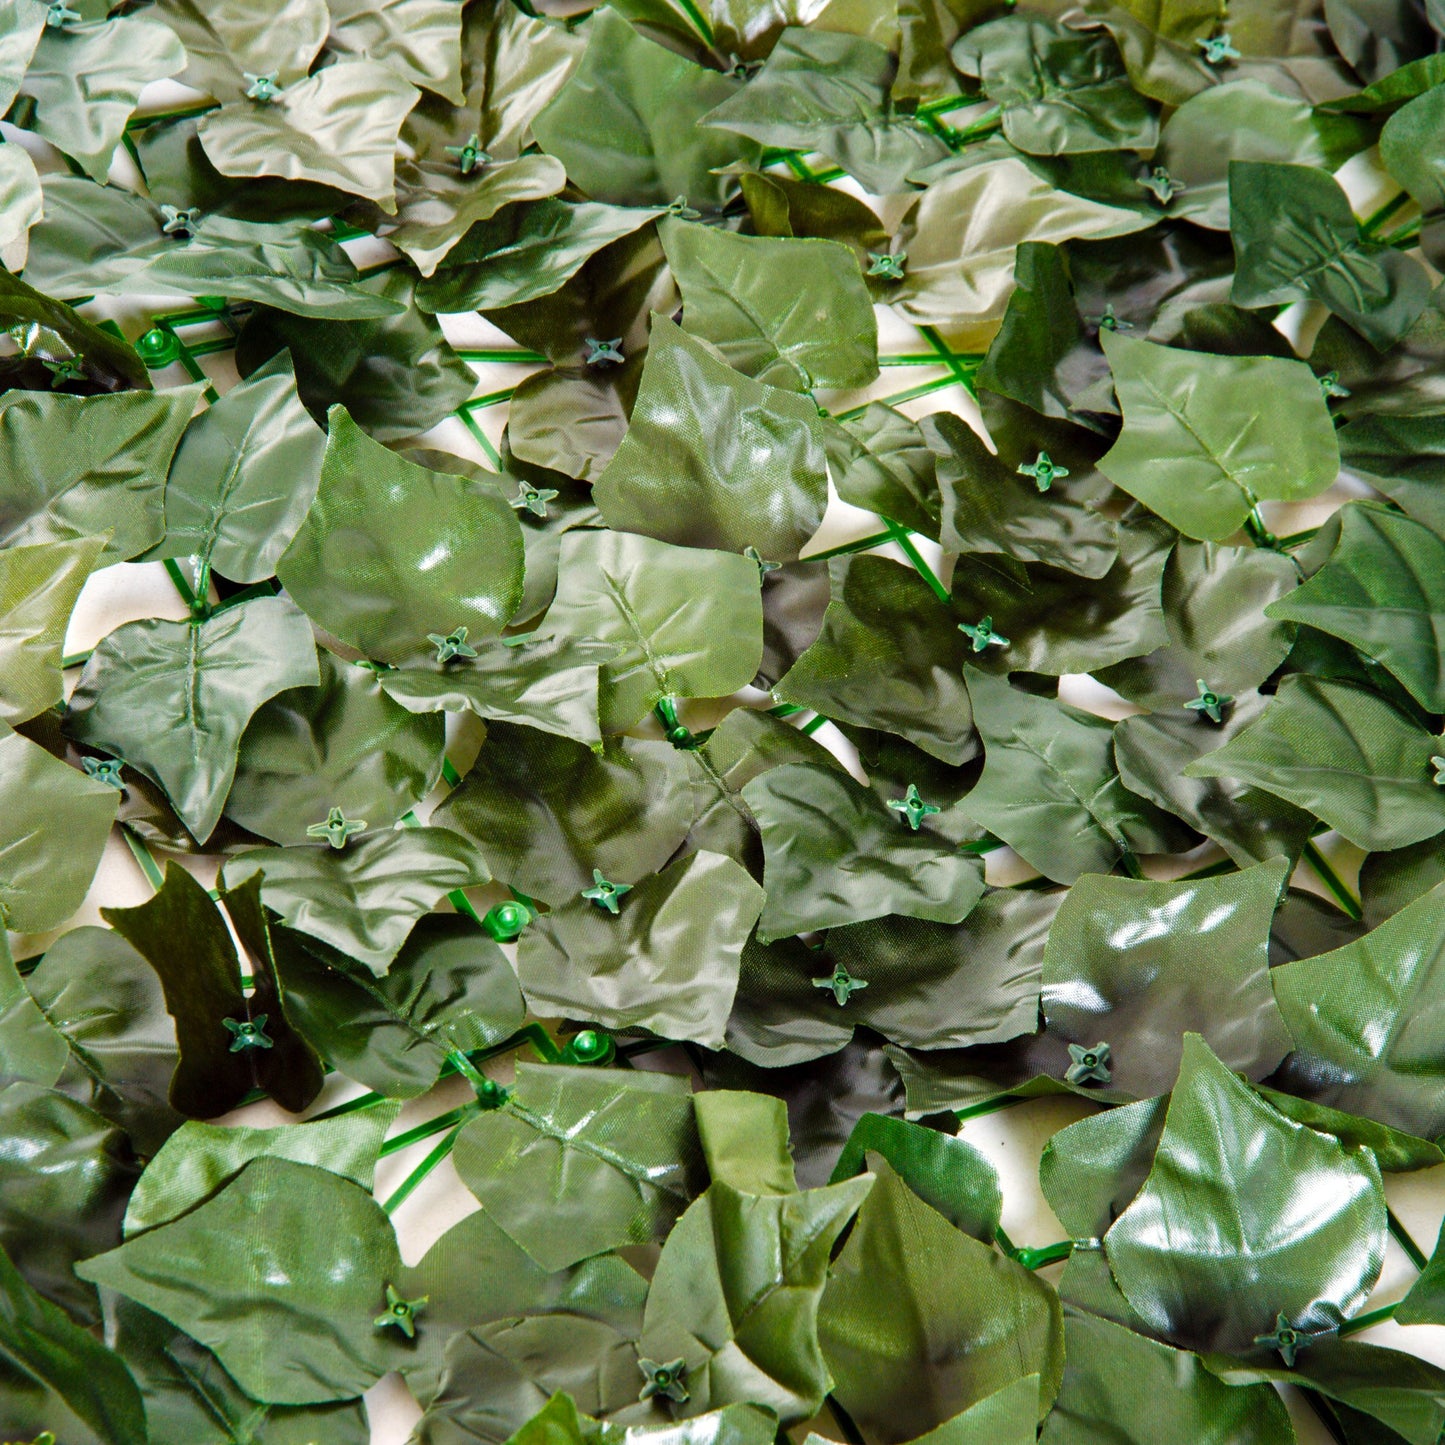 Outsunny Artificial Leaf Screen Panel, 3x1 m-Dark Green